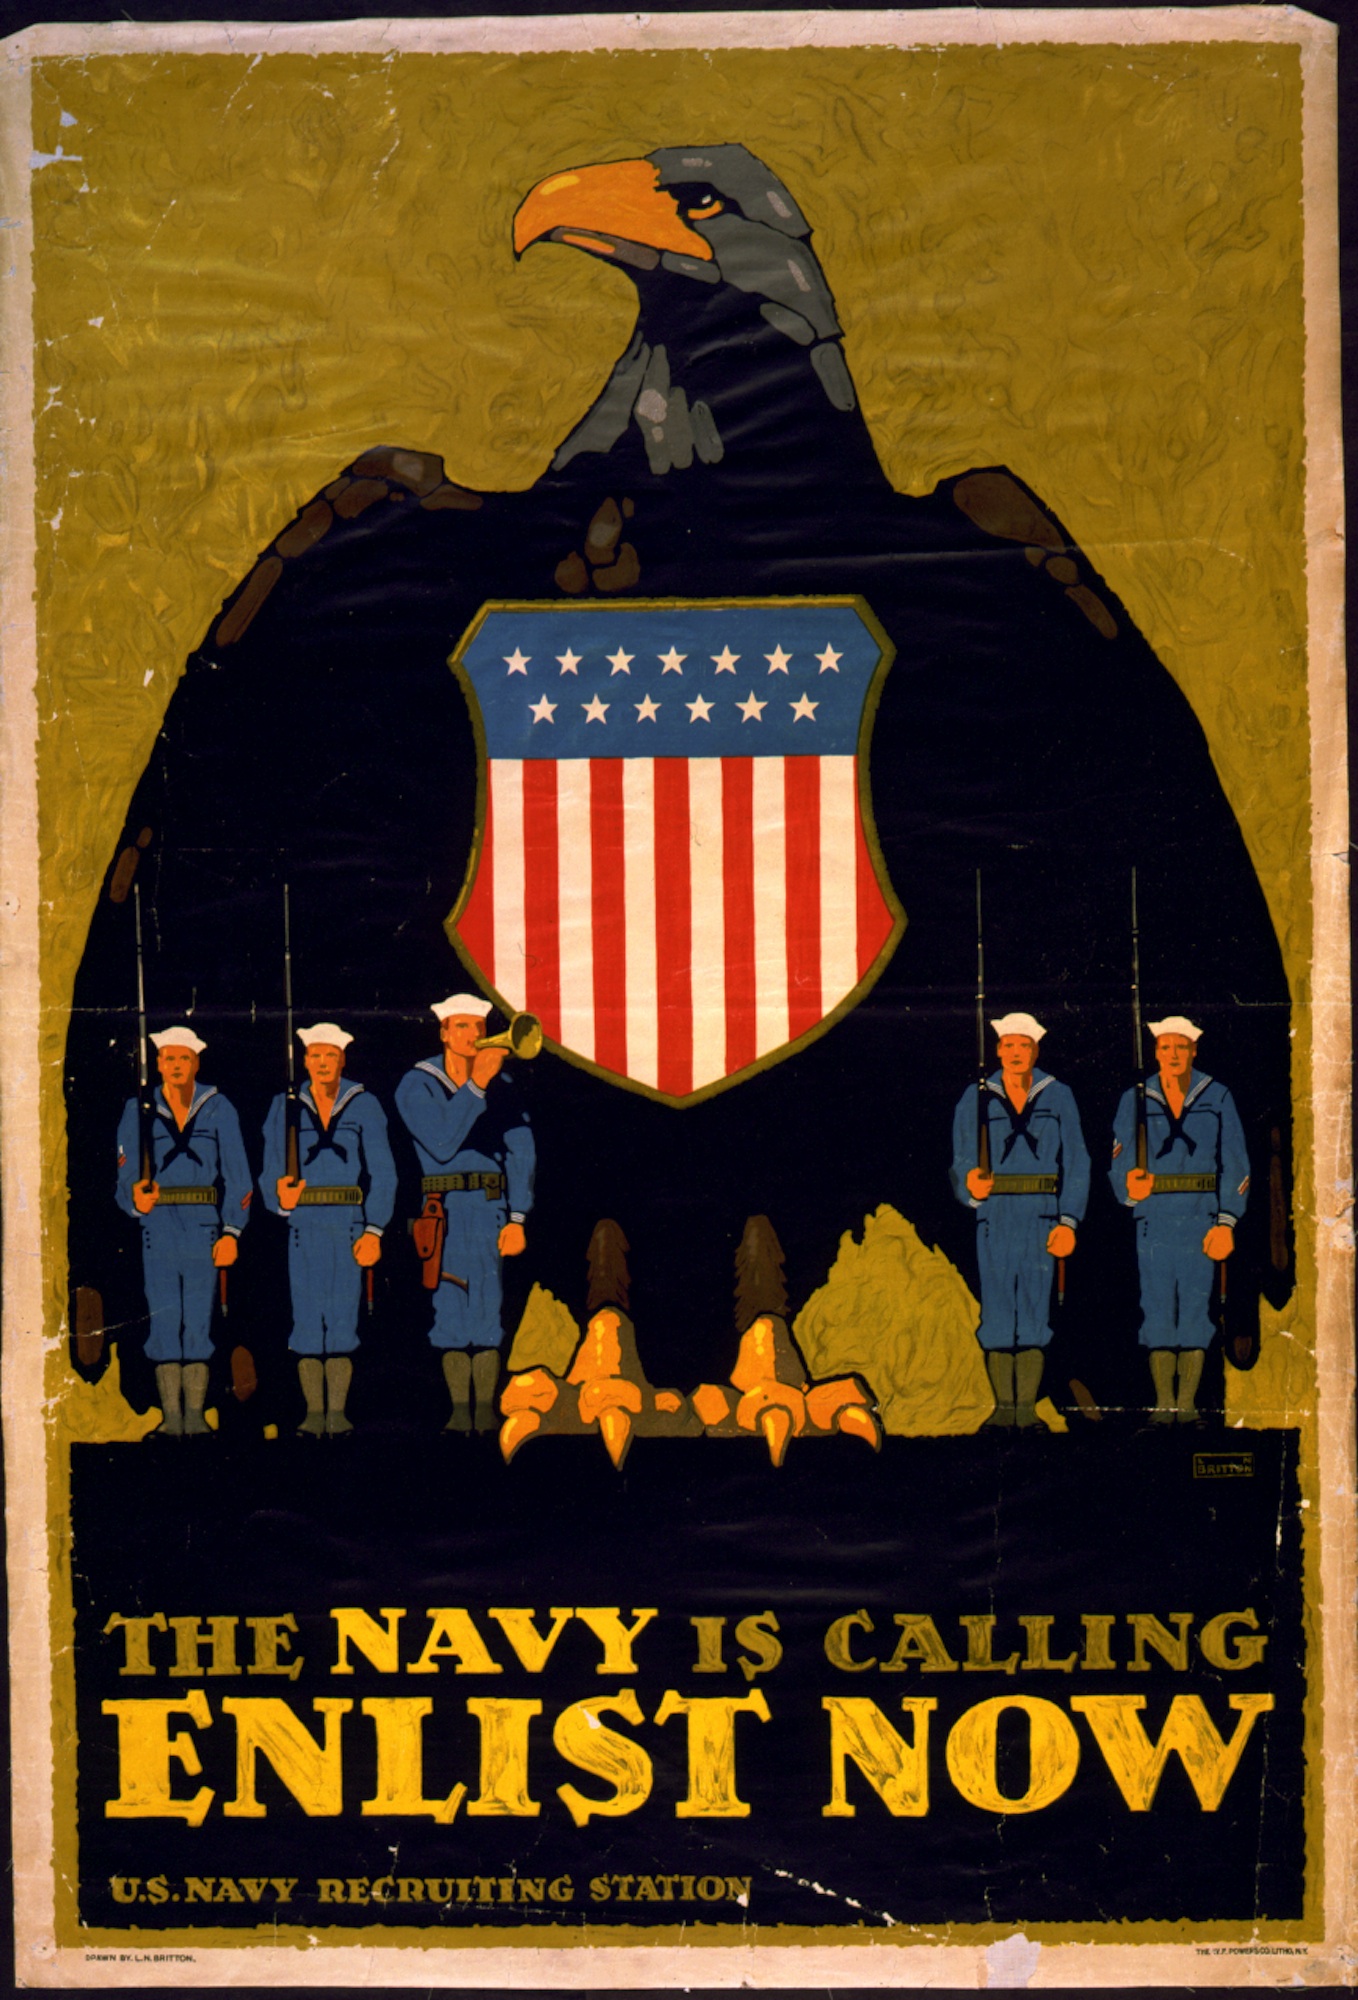 The Navy is Calling